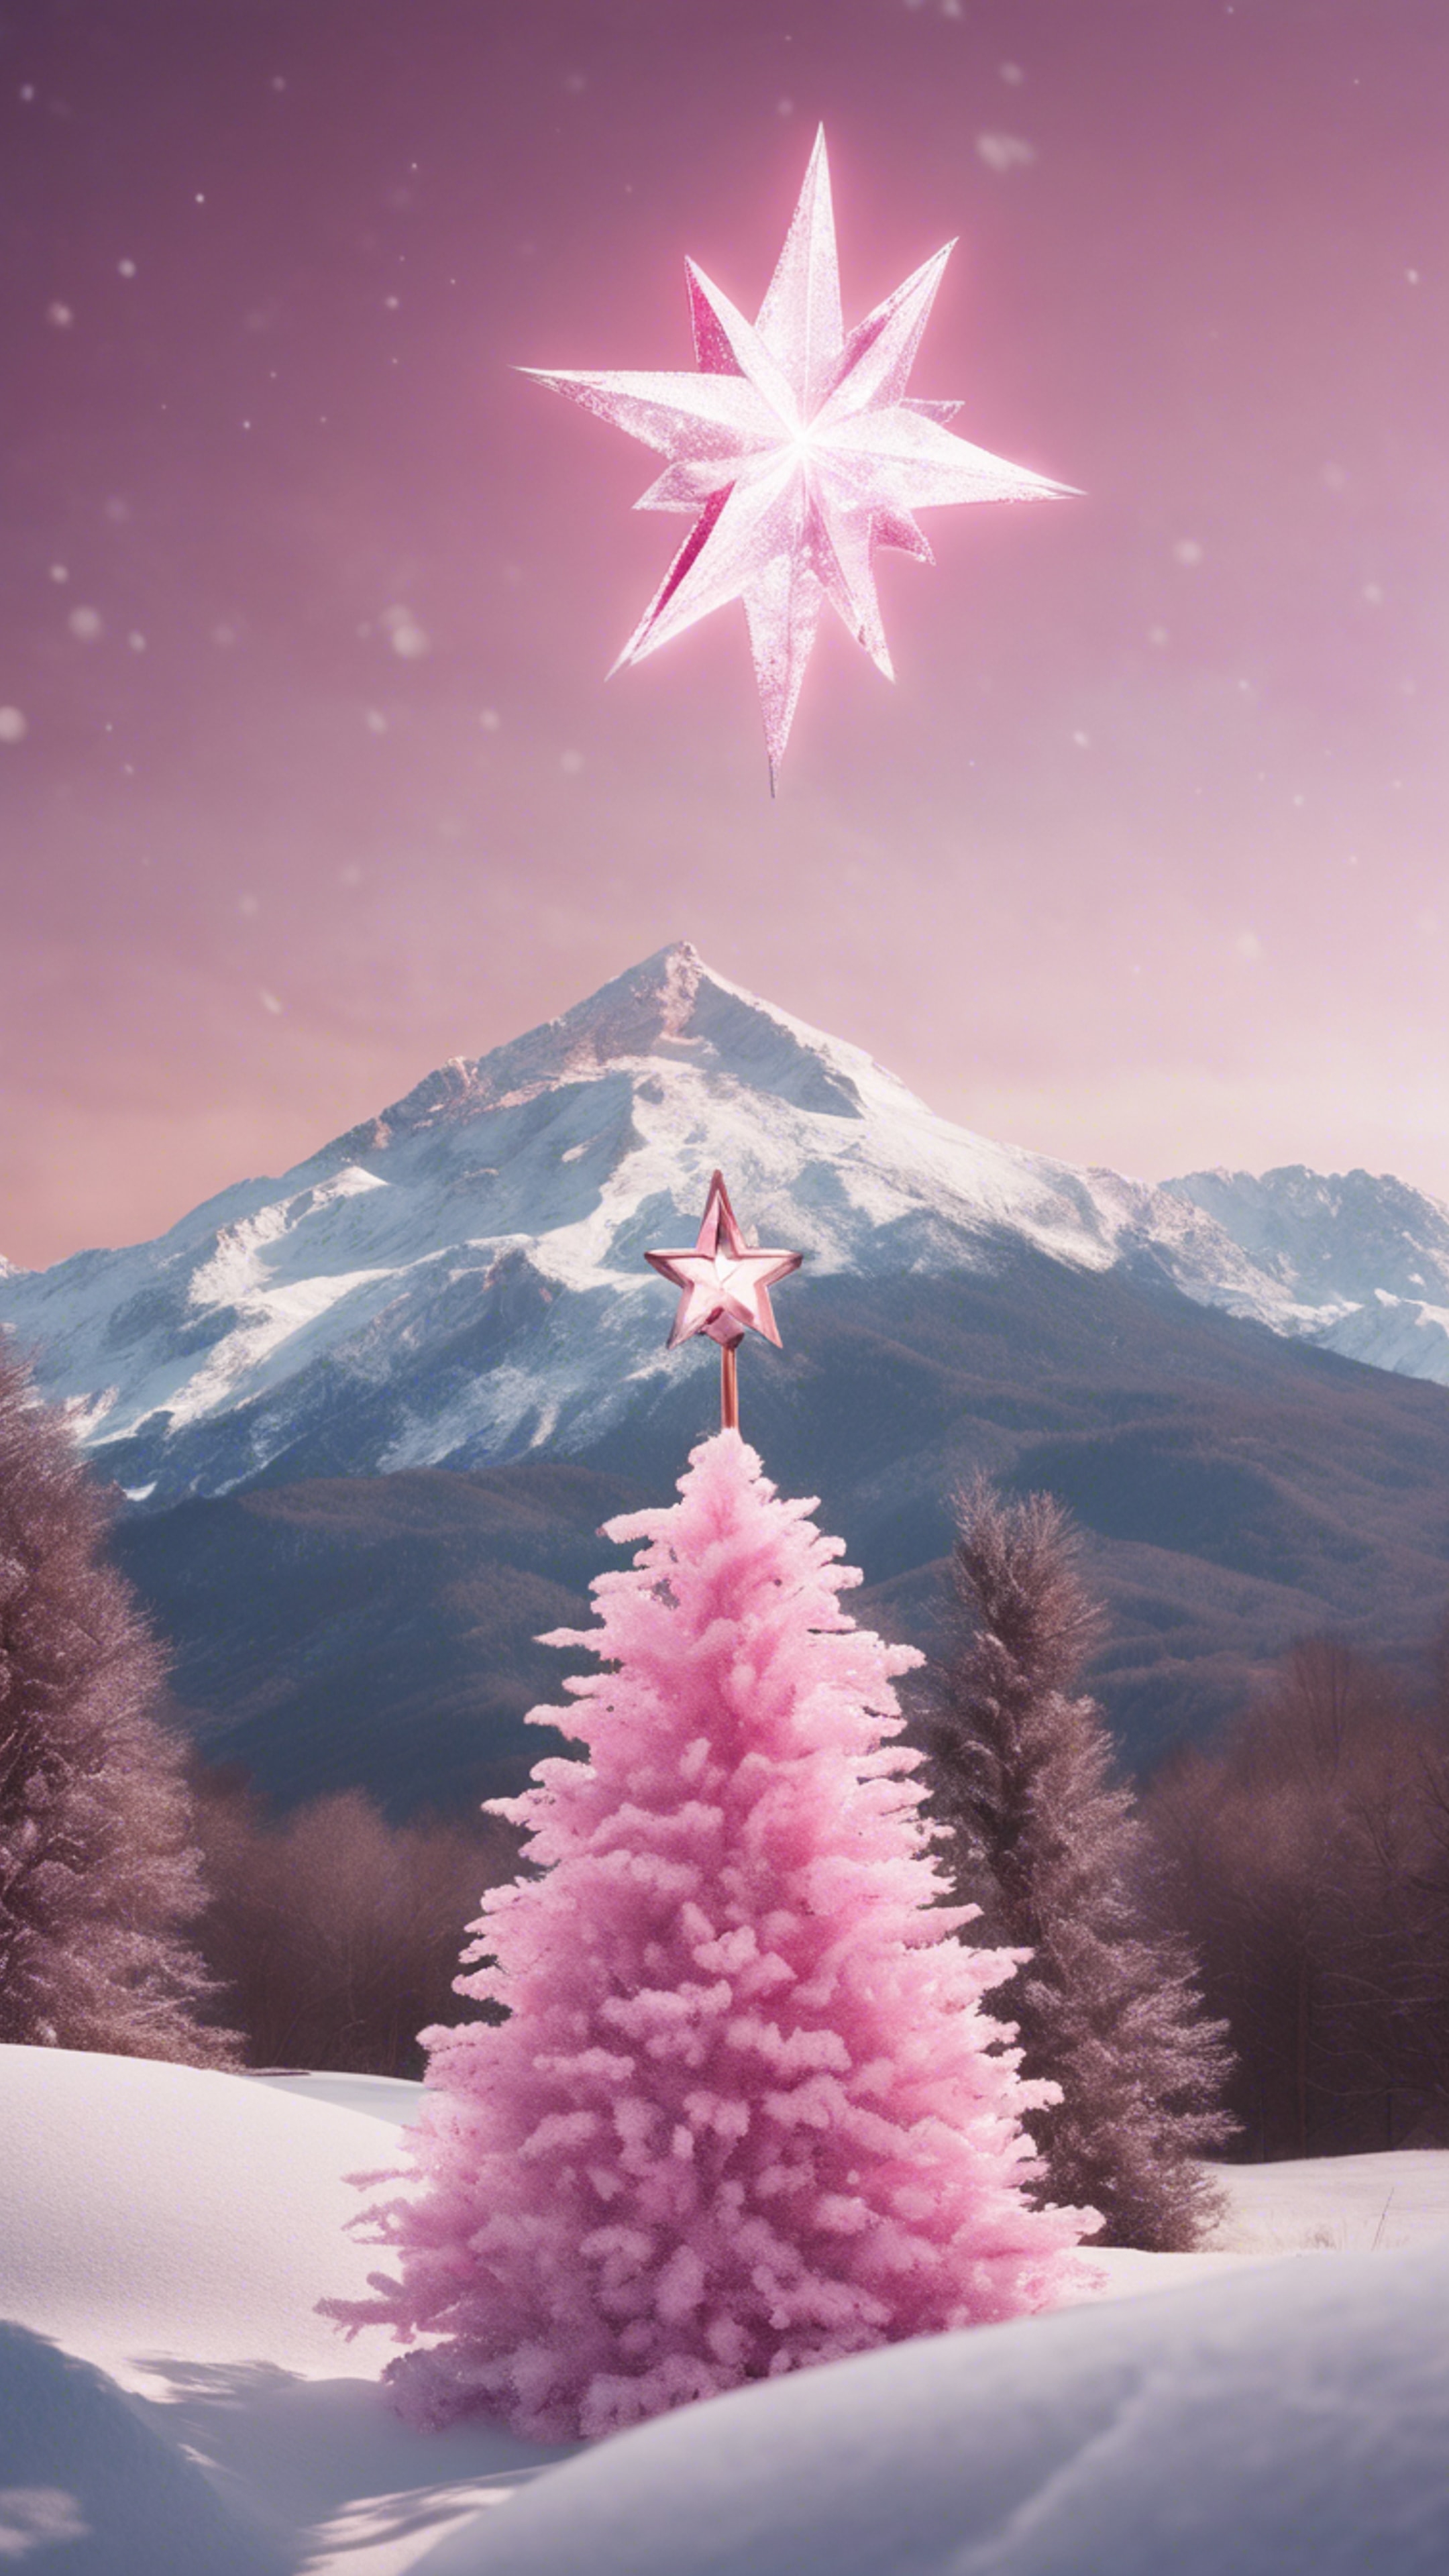 Distant view of a snow-clad mountain with a pink Christmas star shining brightly in the foreground. Шпалери[48430a4d610446a898be]